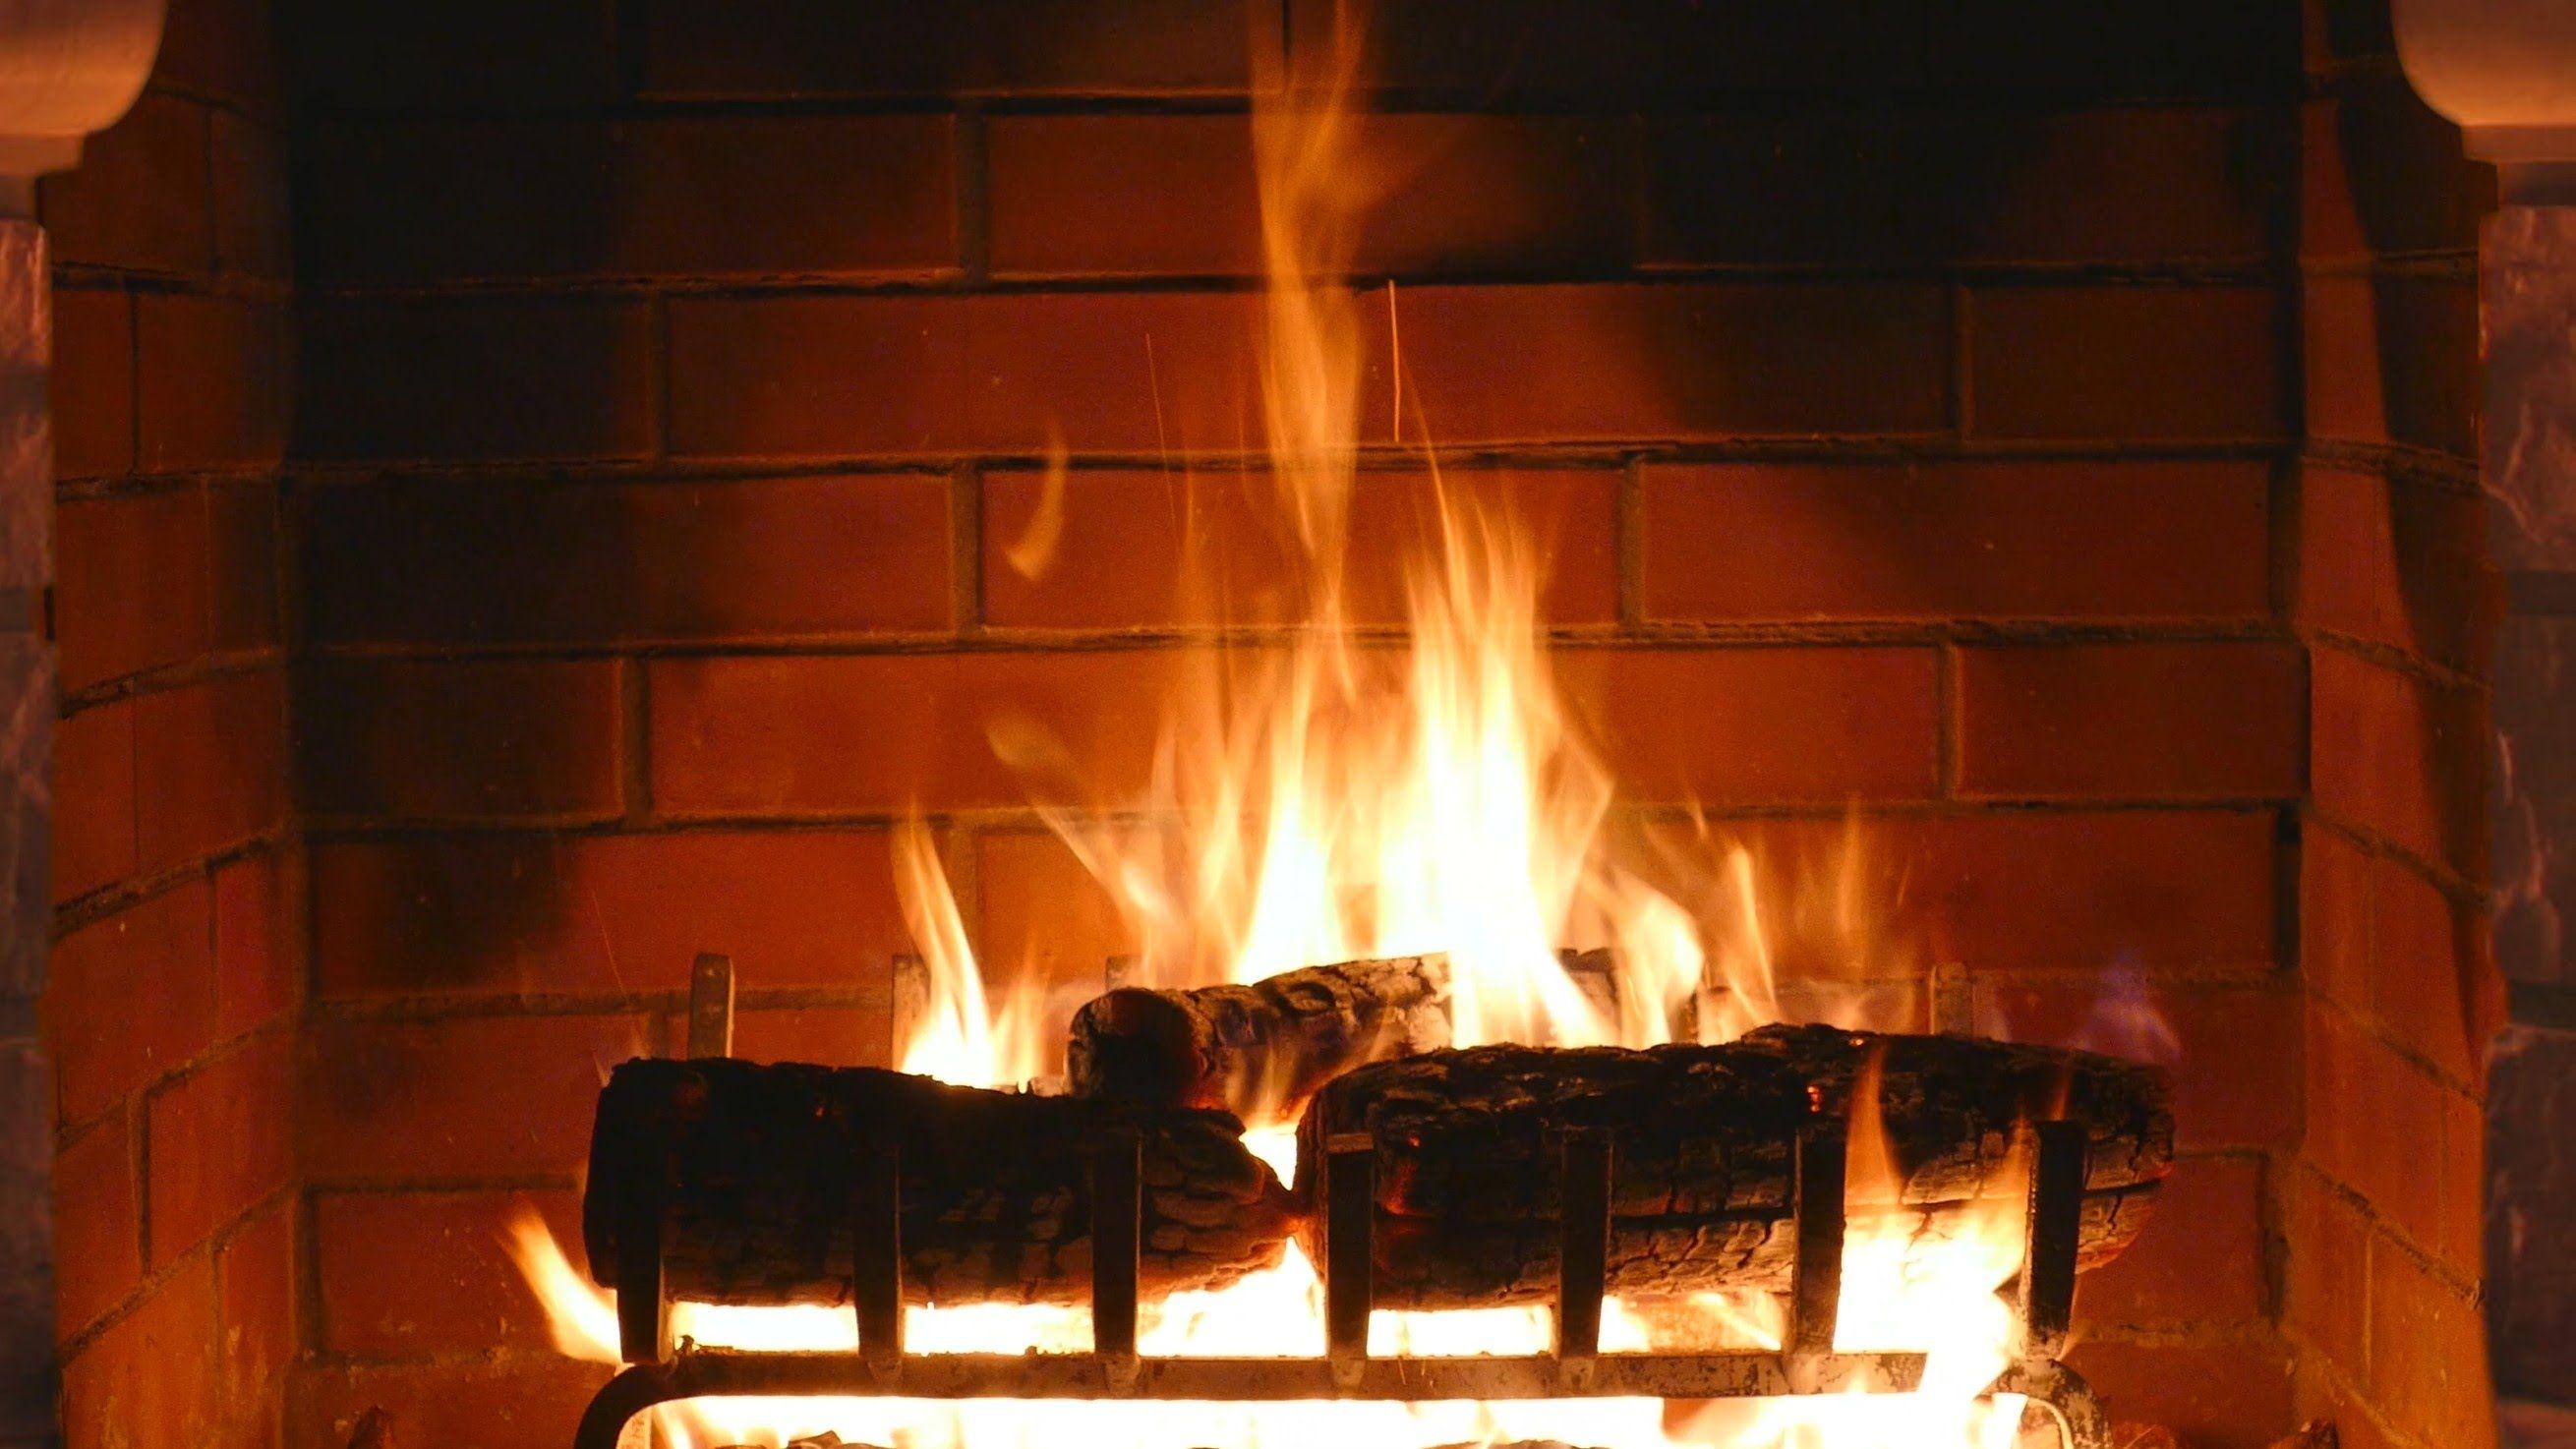 Fireplaces Wallpaper. Fireplaces Wallpaper, Fireplaces Background and